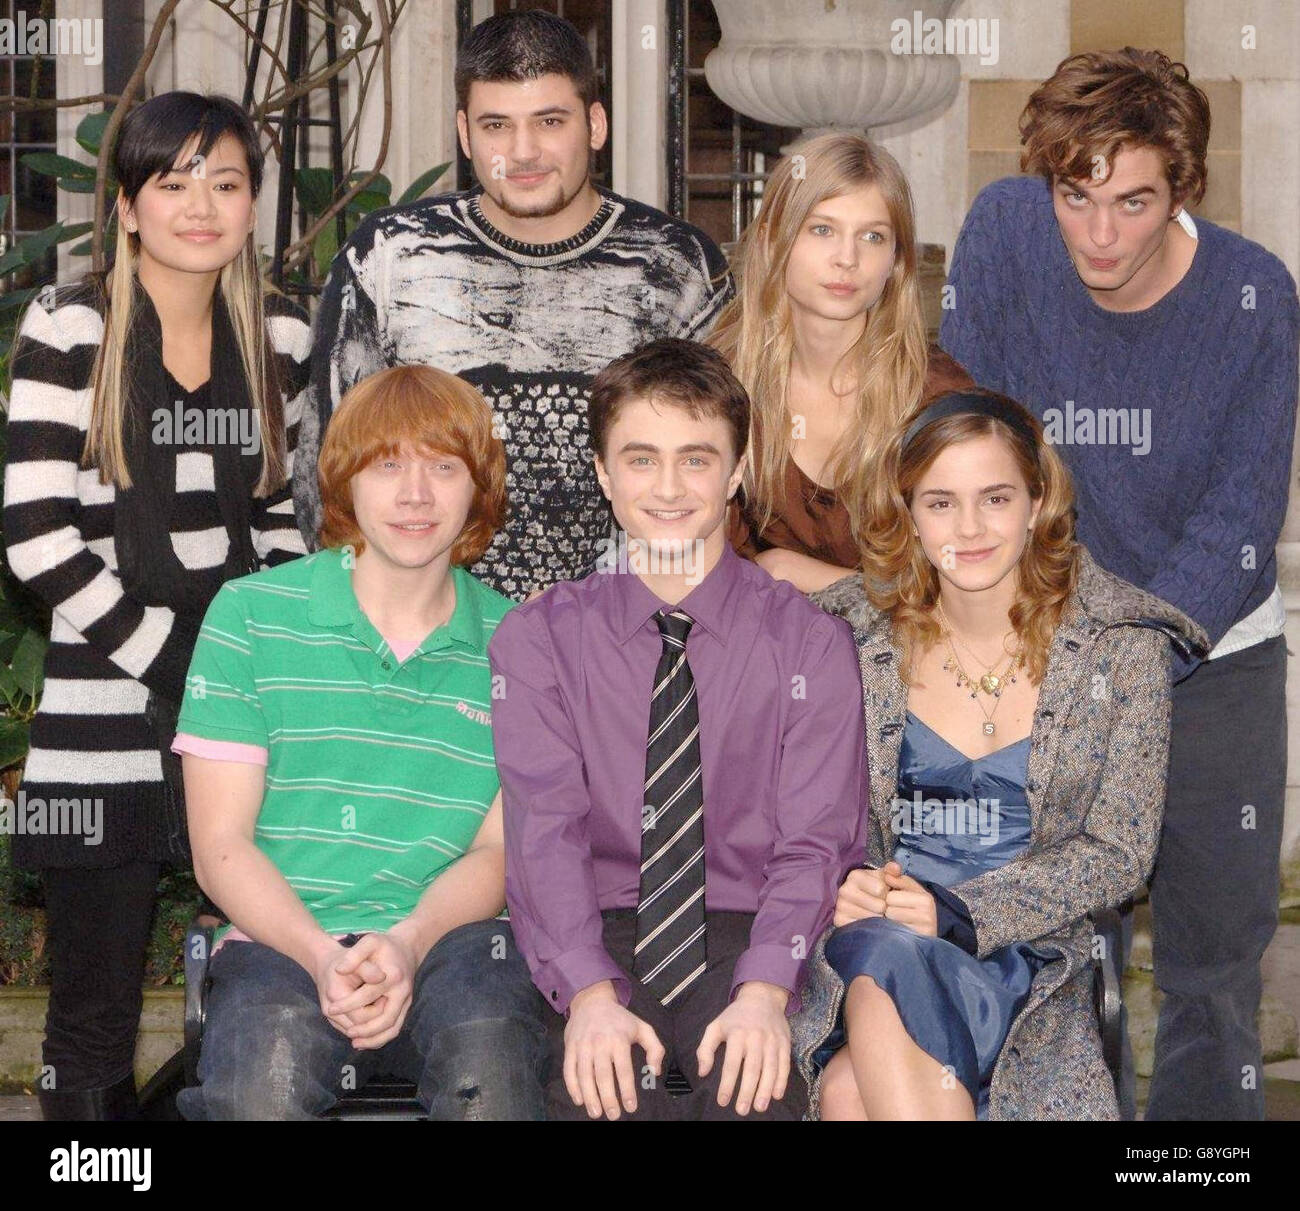 (Back row, left to right) Katie Leung, Stanislav Ianevski, Clemence Poesy and Robert Pattinson, (front row, left to right) Rupert Grint, Daniel Radcliffe and Emma Watson, during a photocall for the new Harry Potter film, 'Harry Potter and the Goblet of Fire', at the Merchant Taylor's Hall, central London, Tuesday 25 October 2005. PRESS ASSOCIATION Photo. Photo credit should read: Ian West/PA Stock Photo